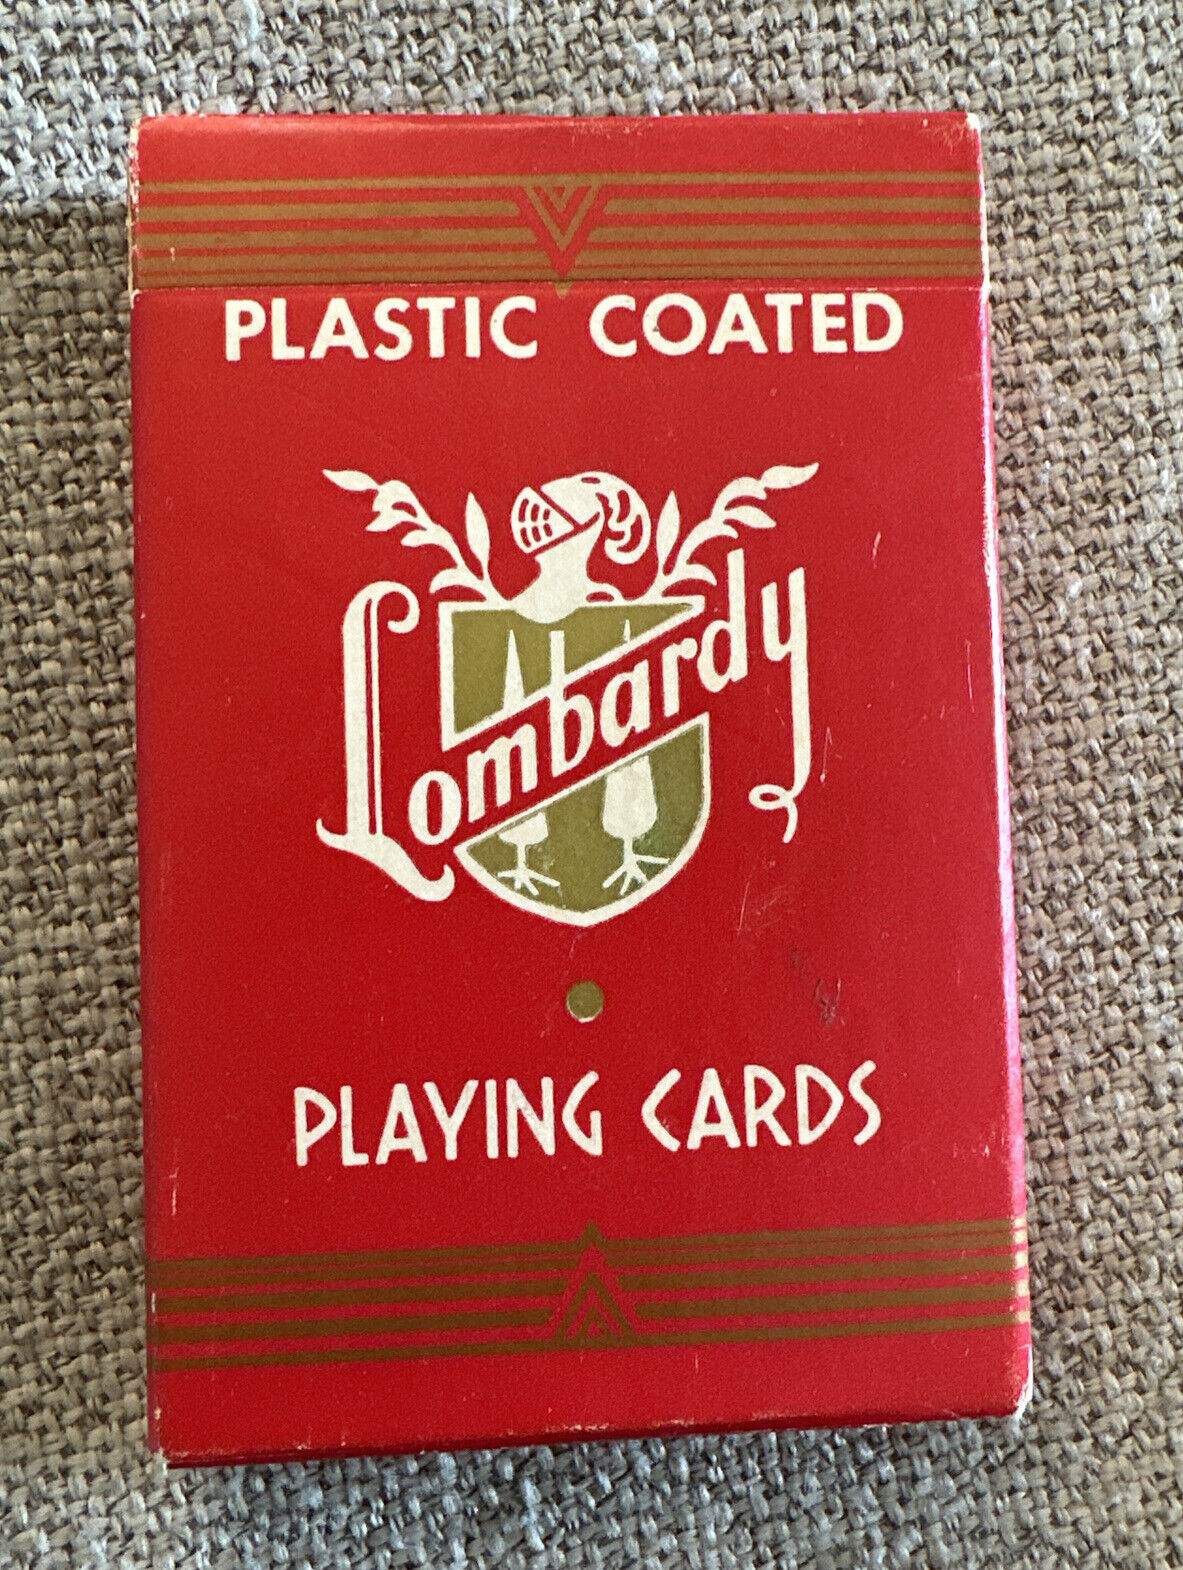 Sealed Plastic Coated Lombardy Playing Cards New Old Stock Linen